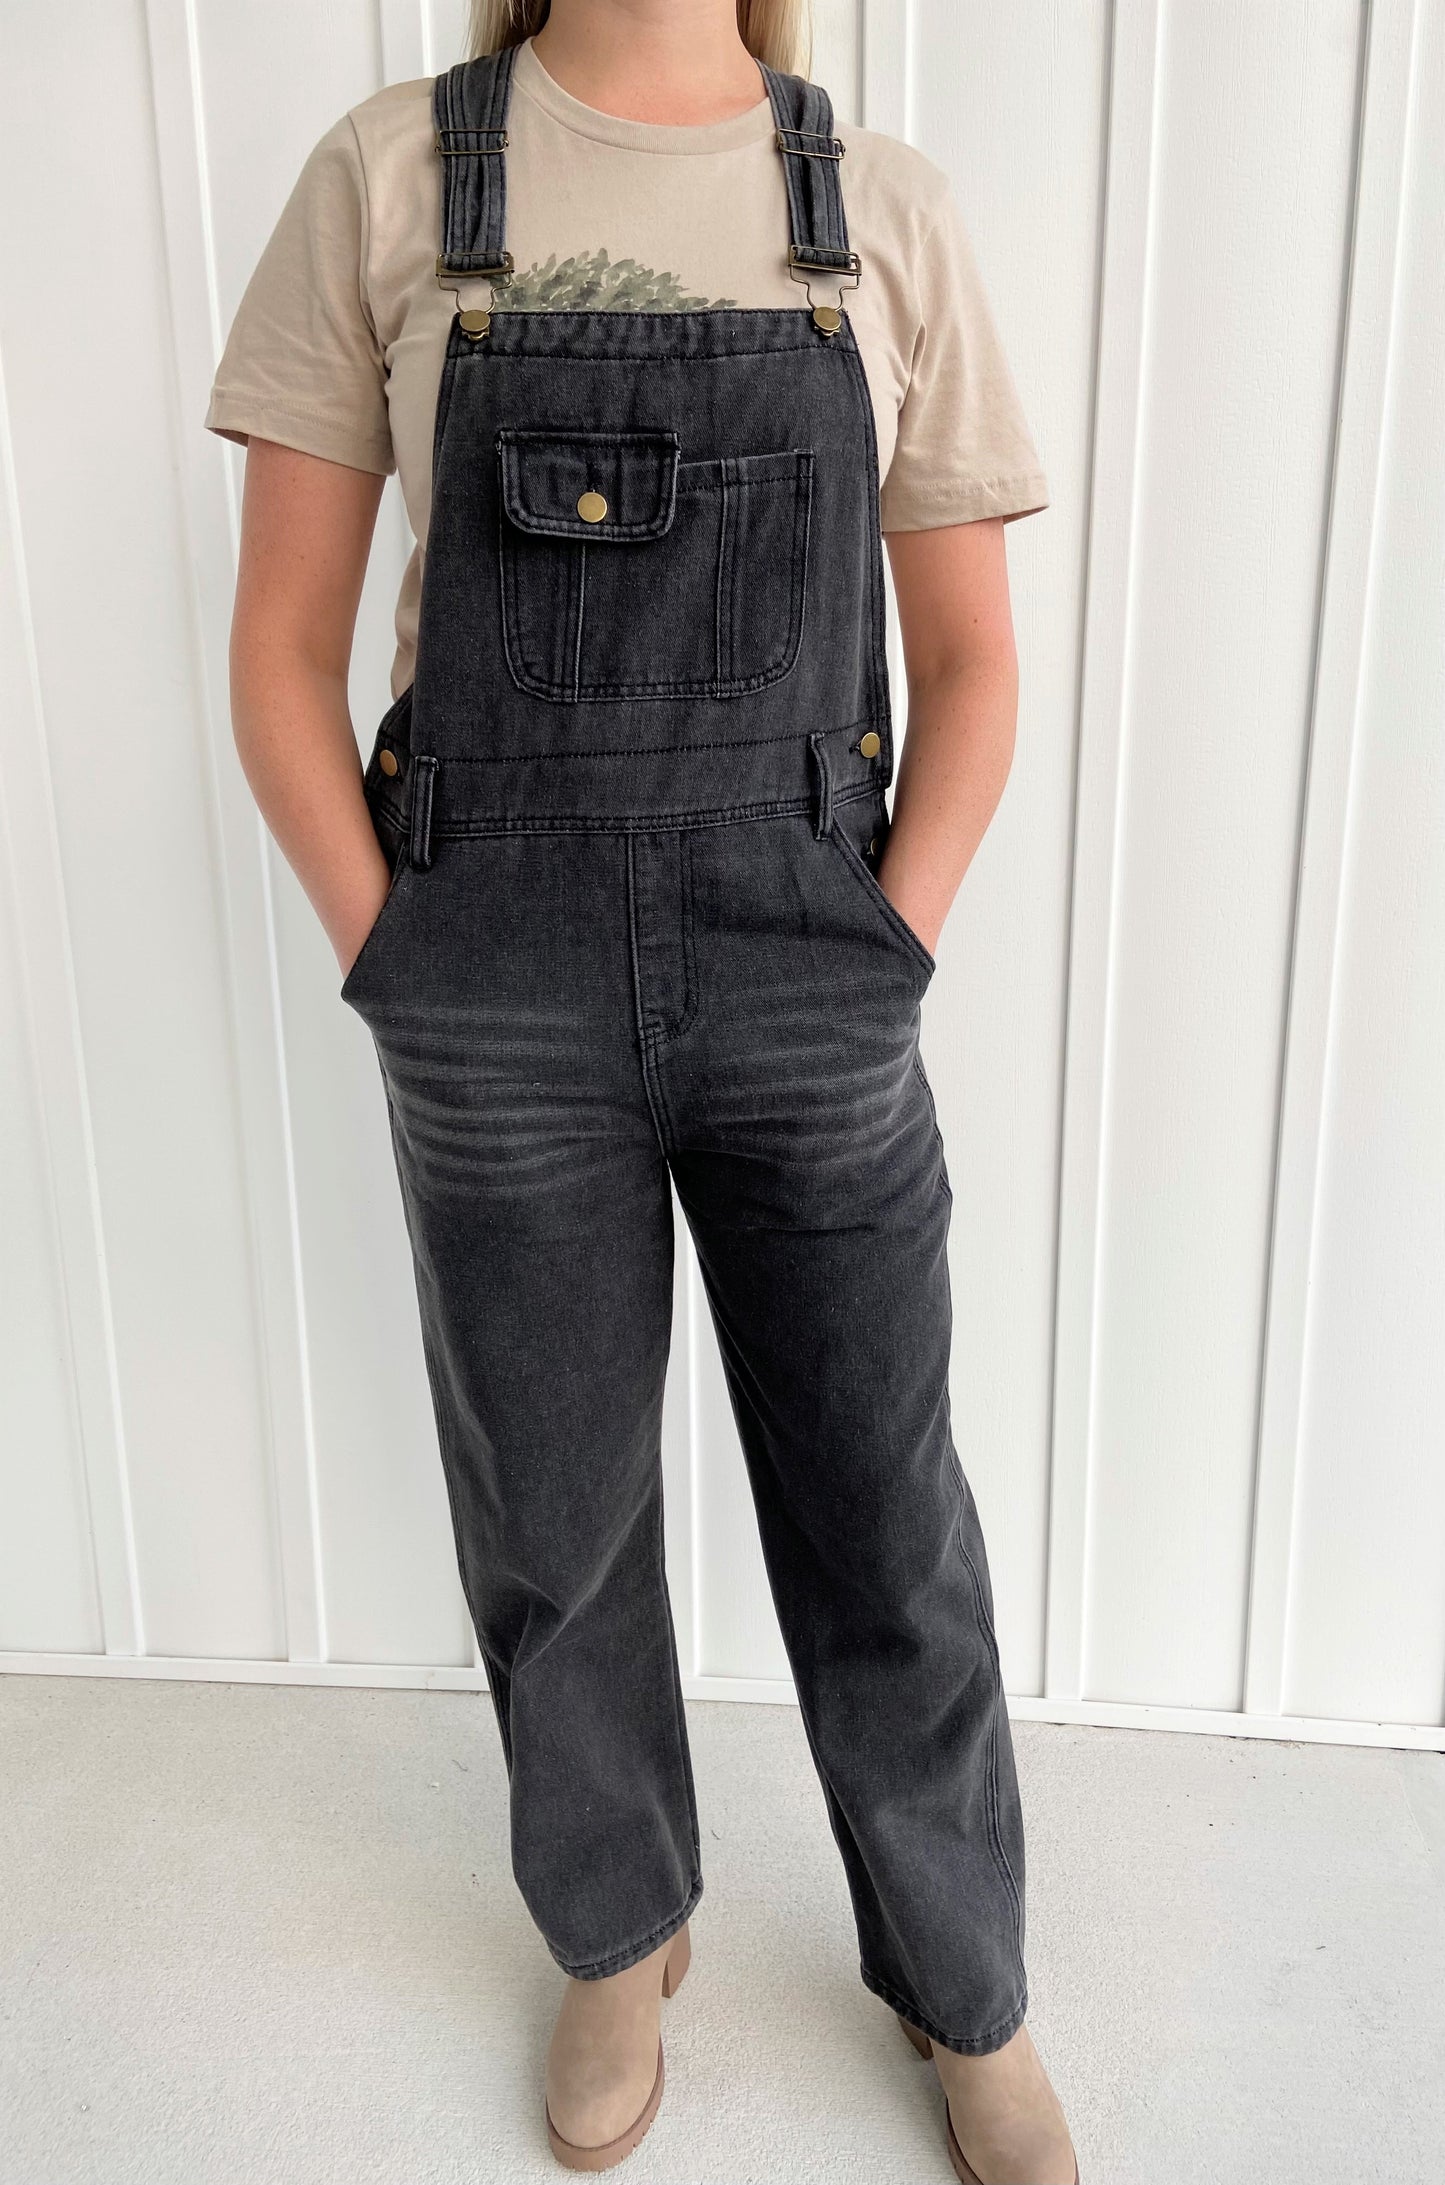 Coffee Date Overalls